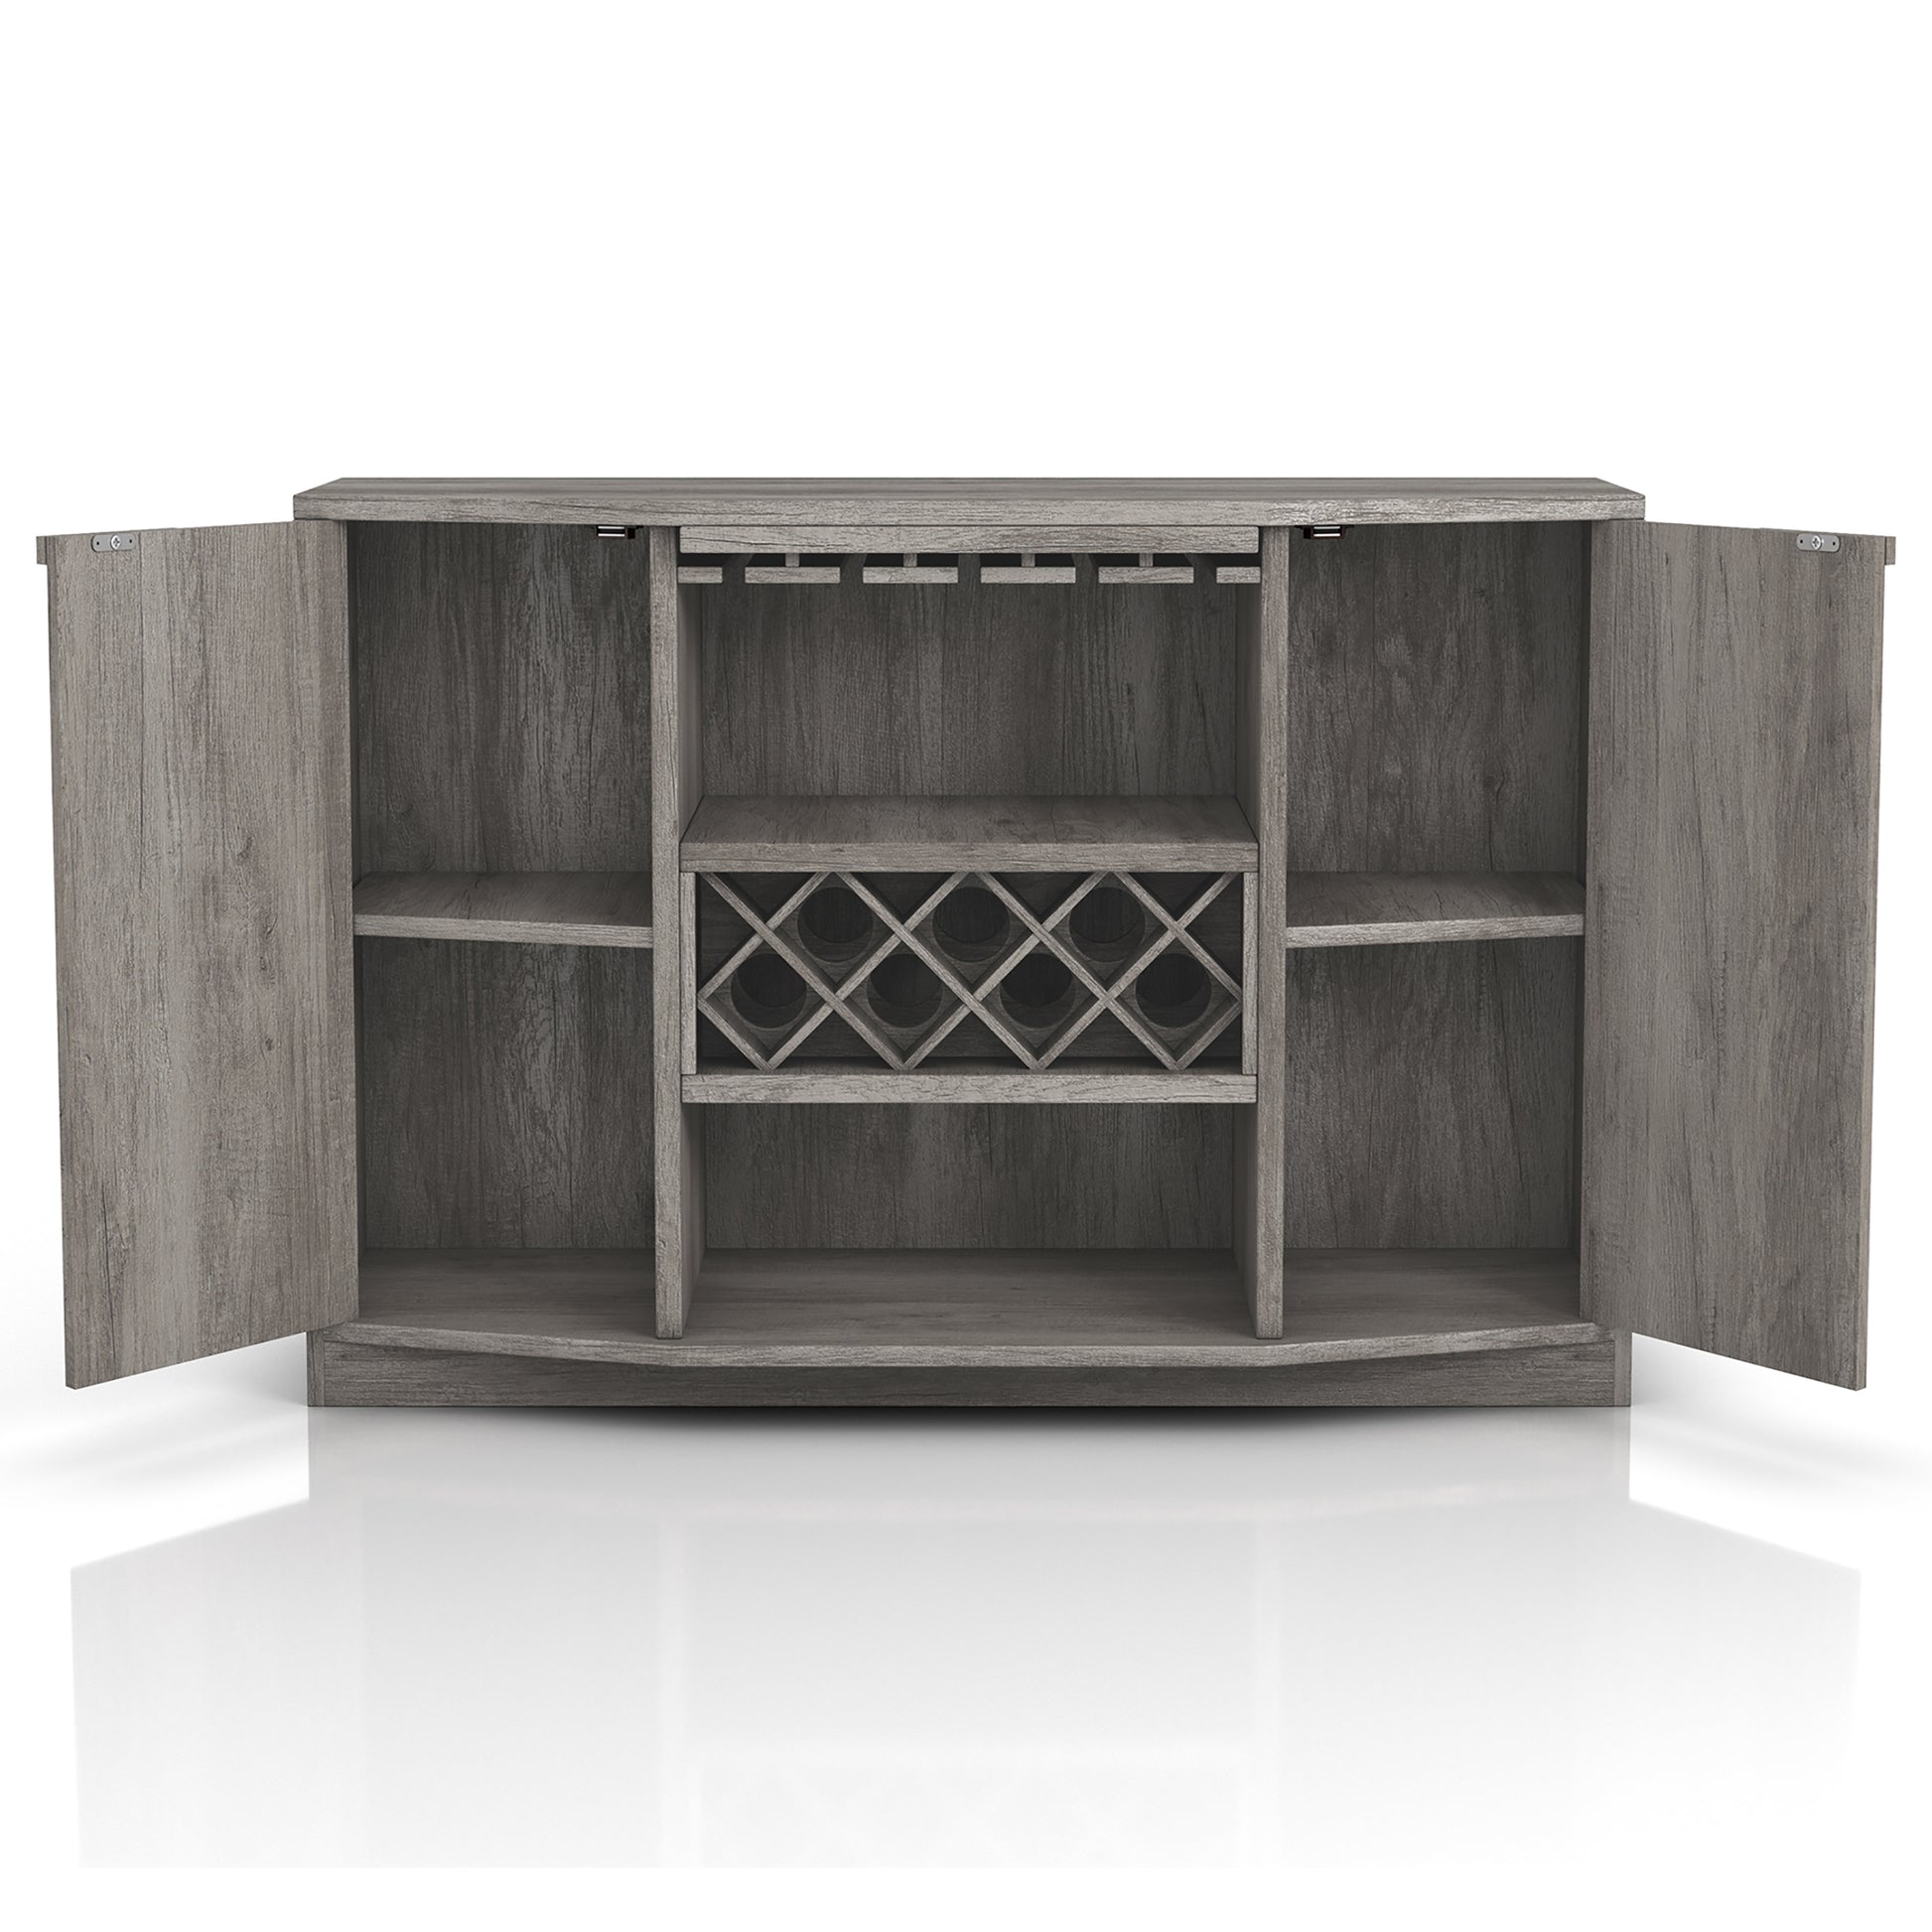 Front-facing transitional vintage gray oak two-door buffet with wine and stemware racks and doors open on a white background